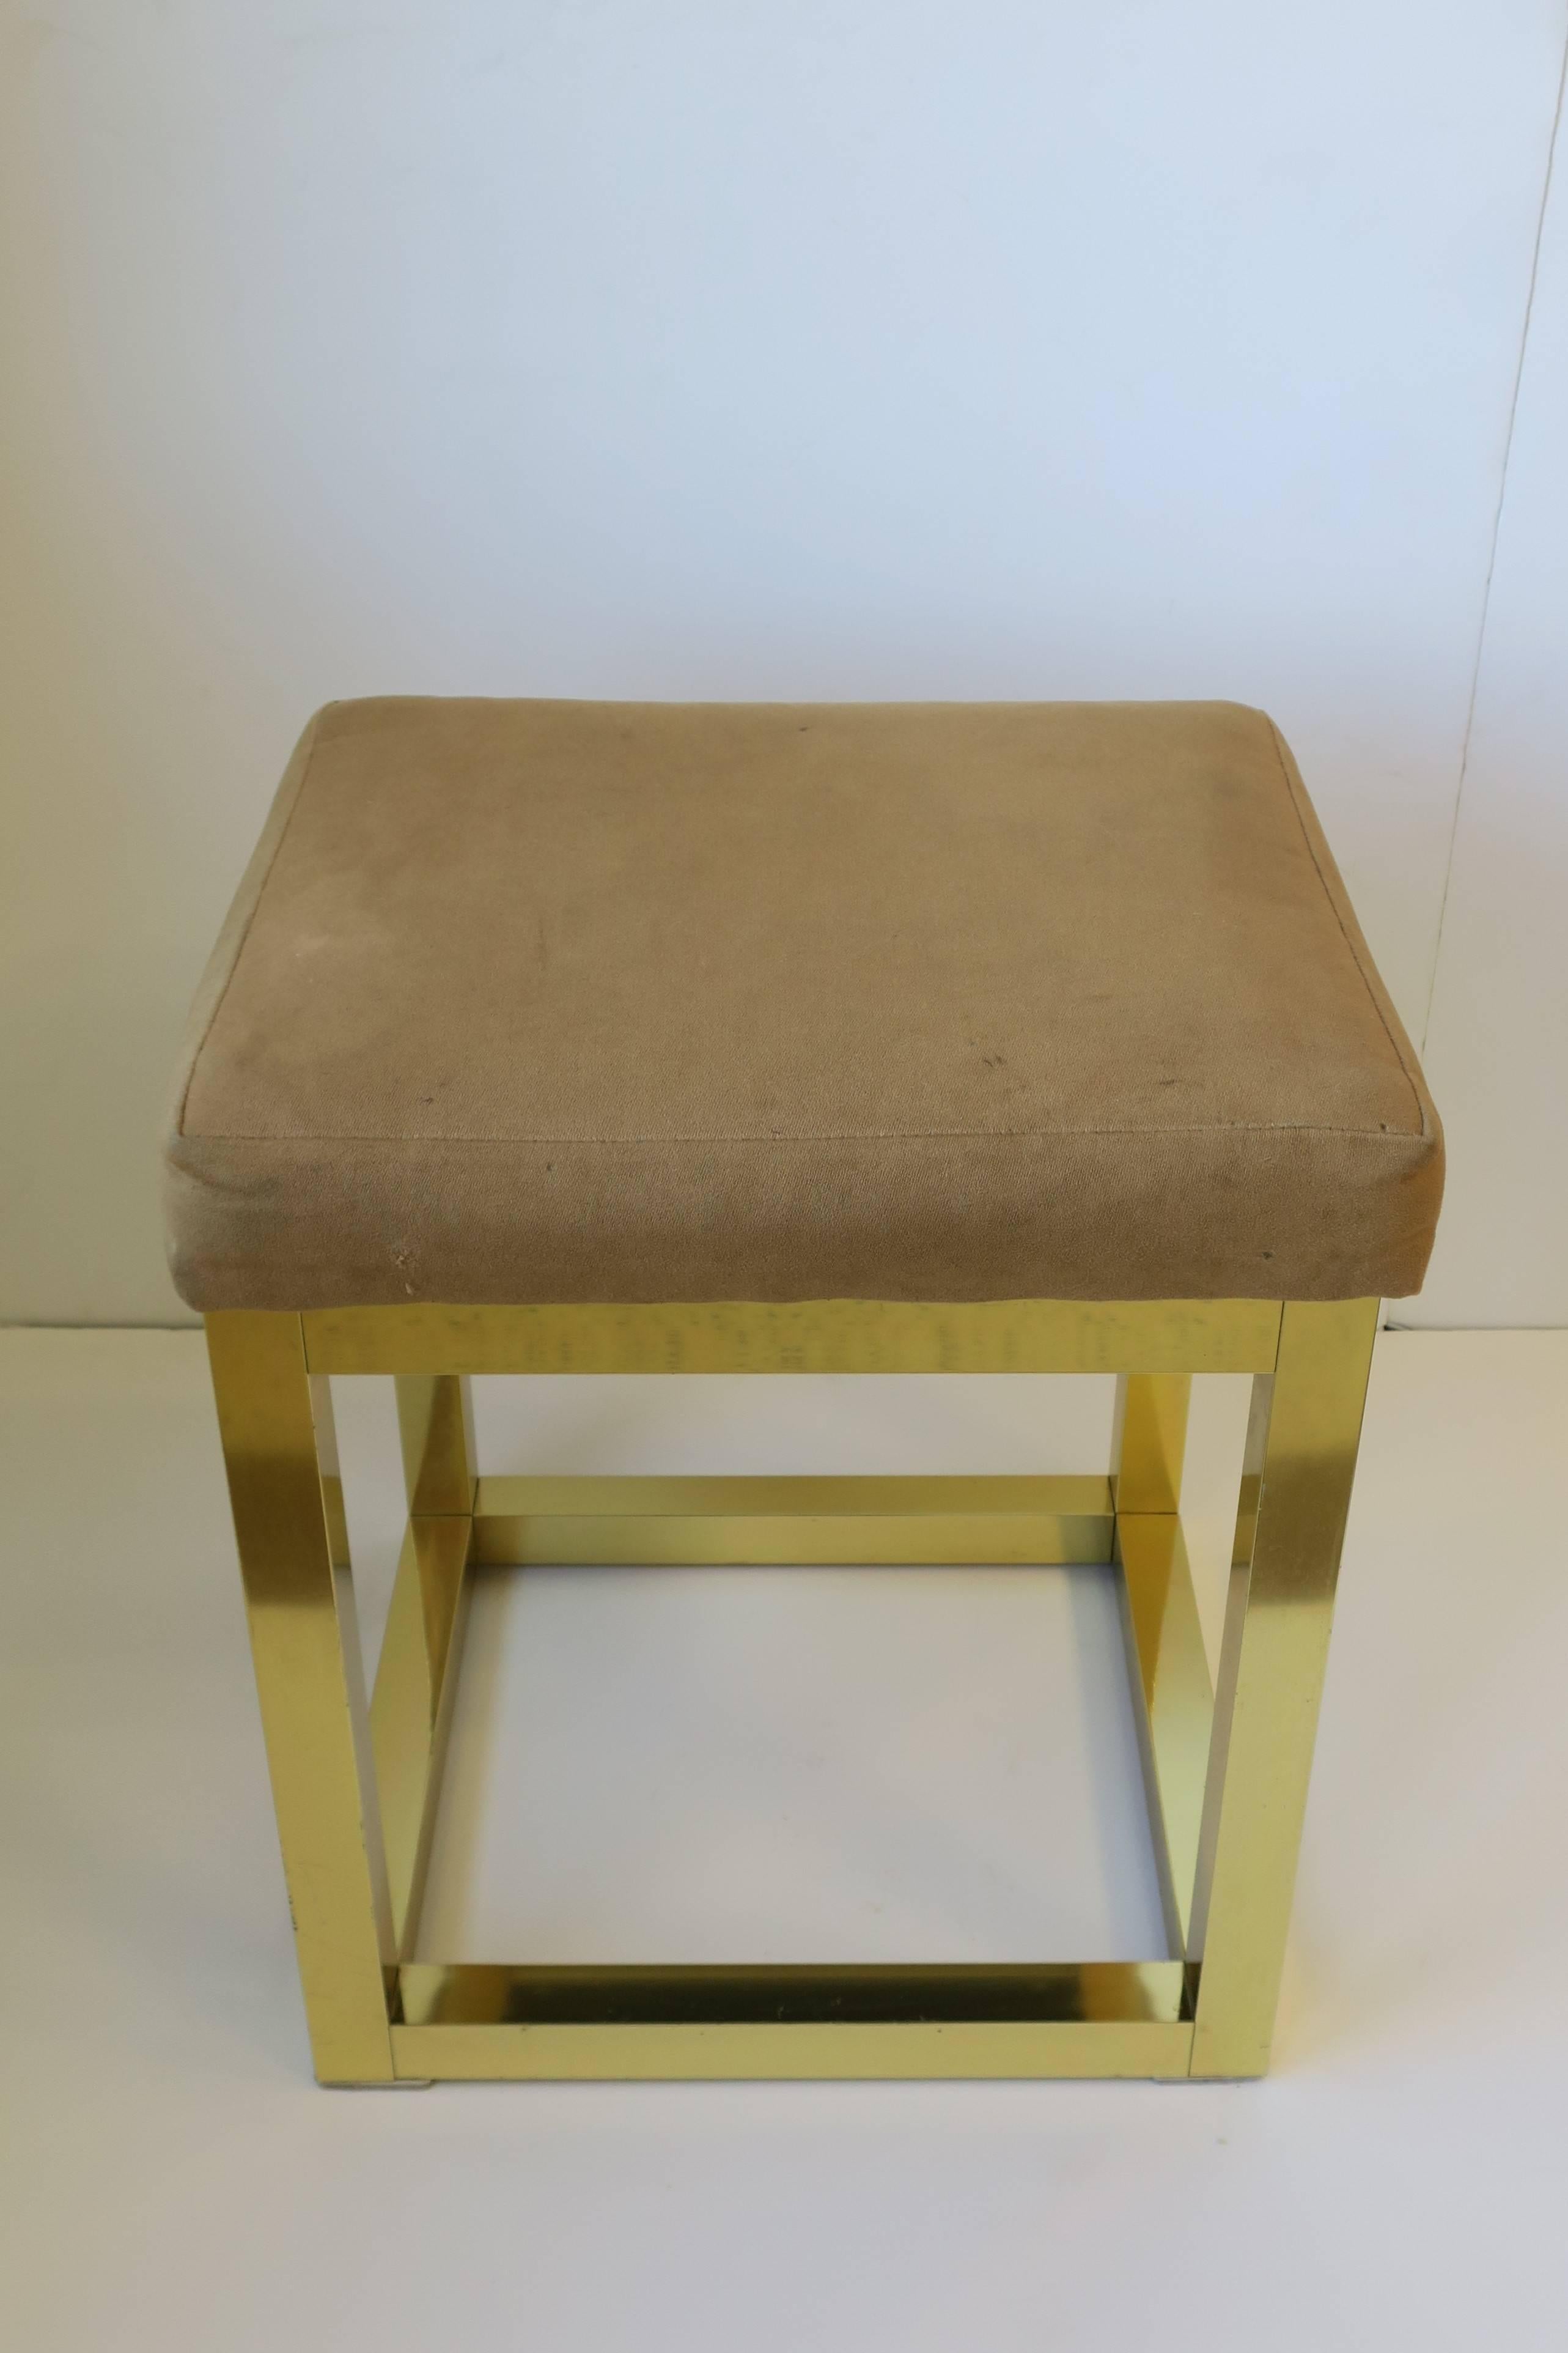 Plated 1970s Modern Brass Bench or Stool in the Style of Designer Paul Evans For Sale